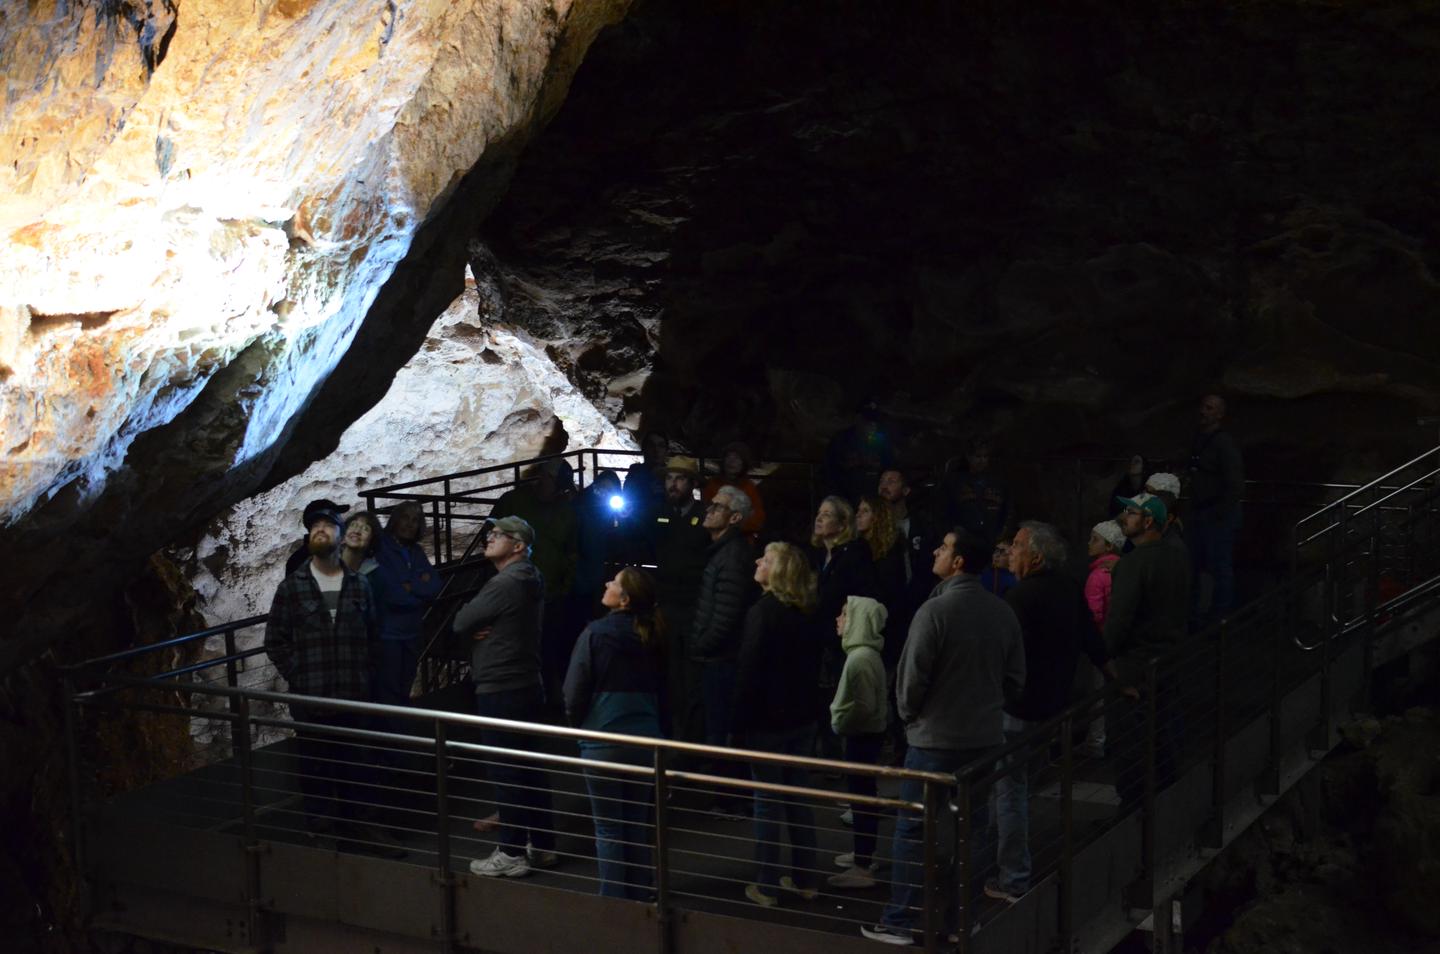 A tour group on a platform with a Park Ranger pointing out calcite crystals in a cave.On the Discovery Tour, visitors still have the opportunity to see some of the "jewels" of Jewel Cave.